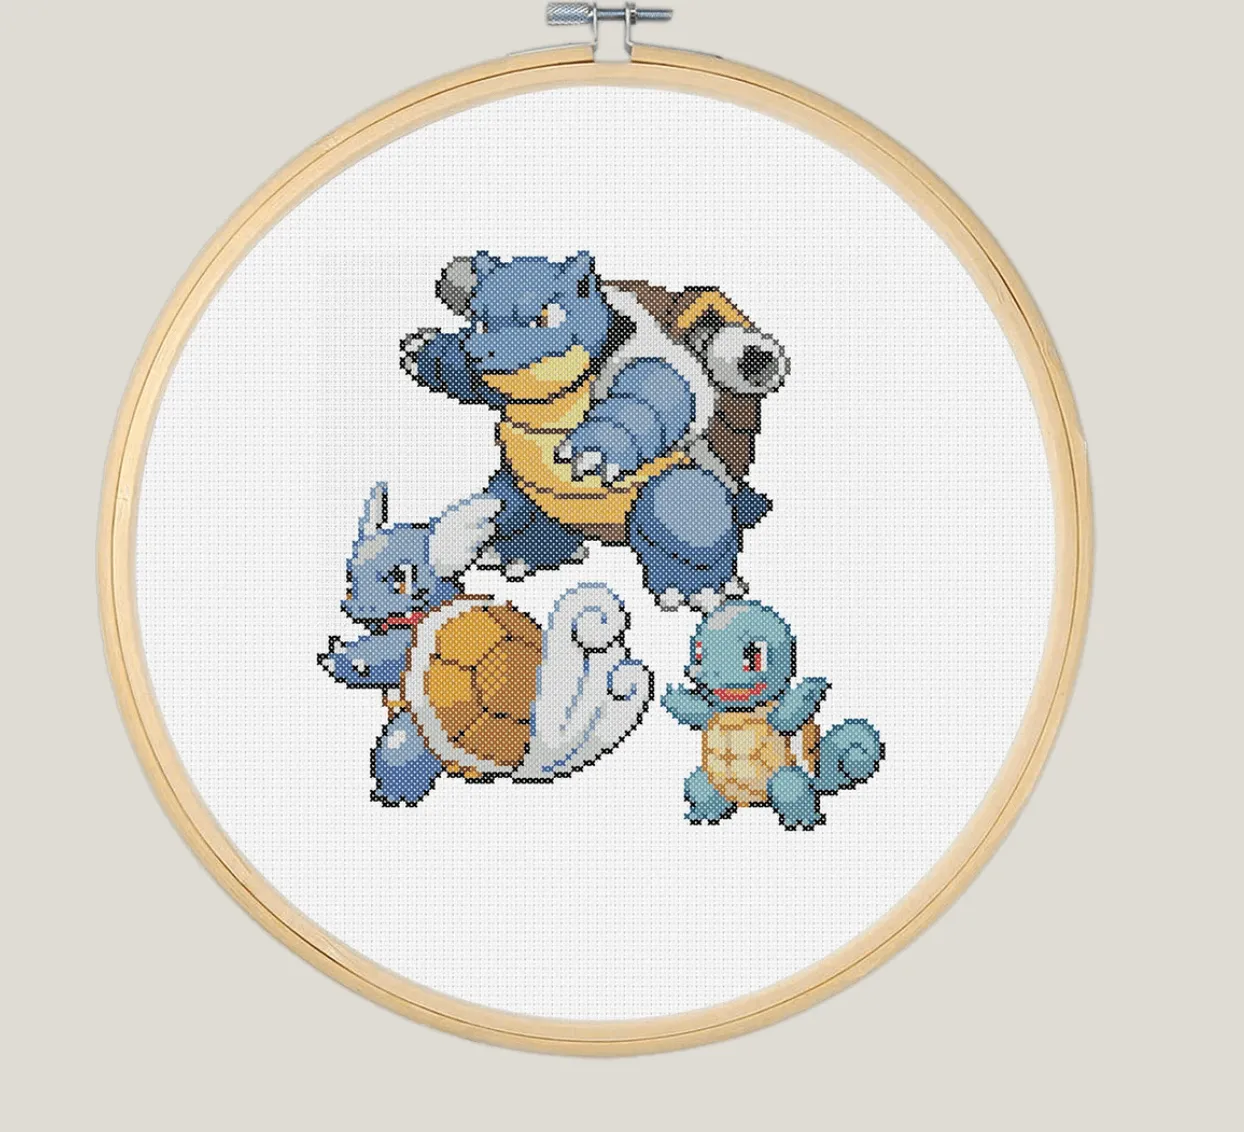 Pokmon Cross Stitch: Bring Your Favorite Pokmon to Life with Over